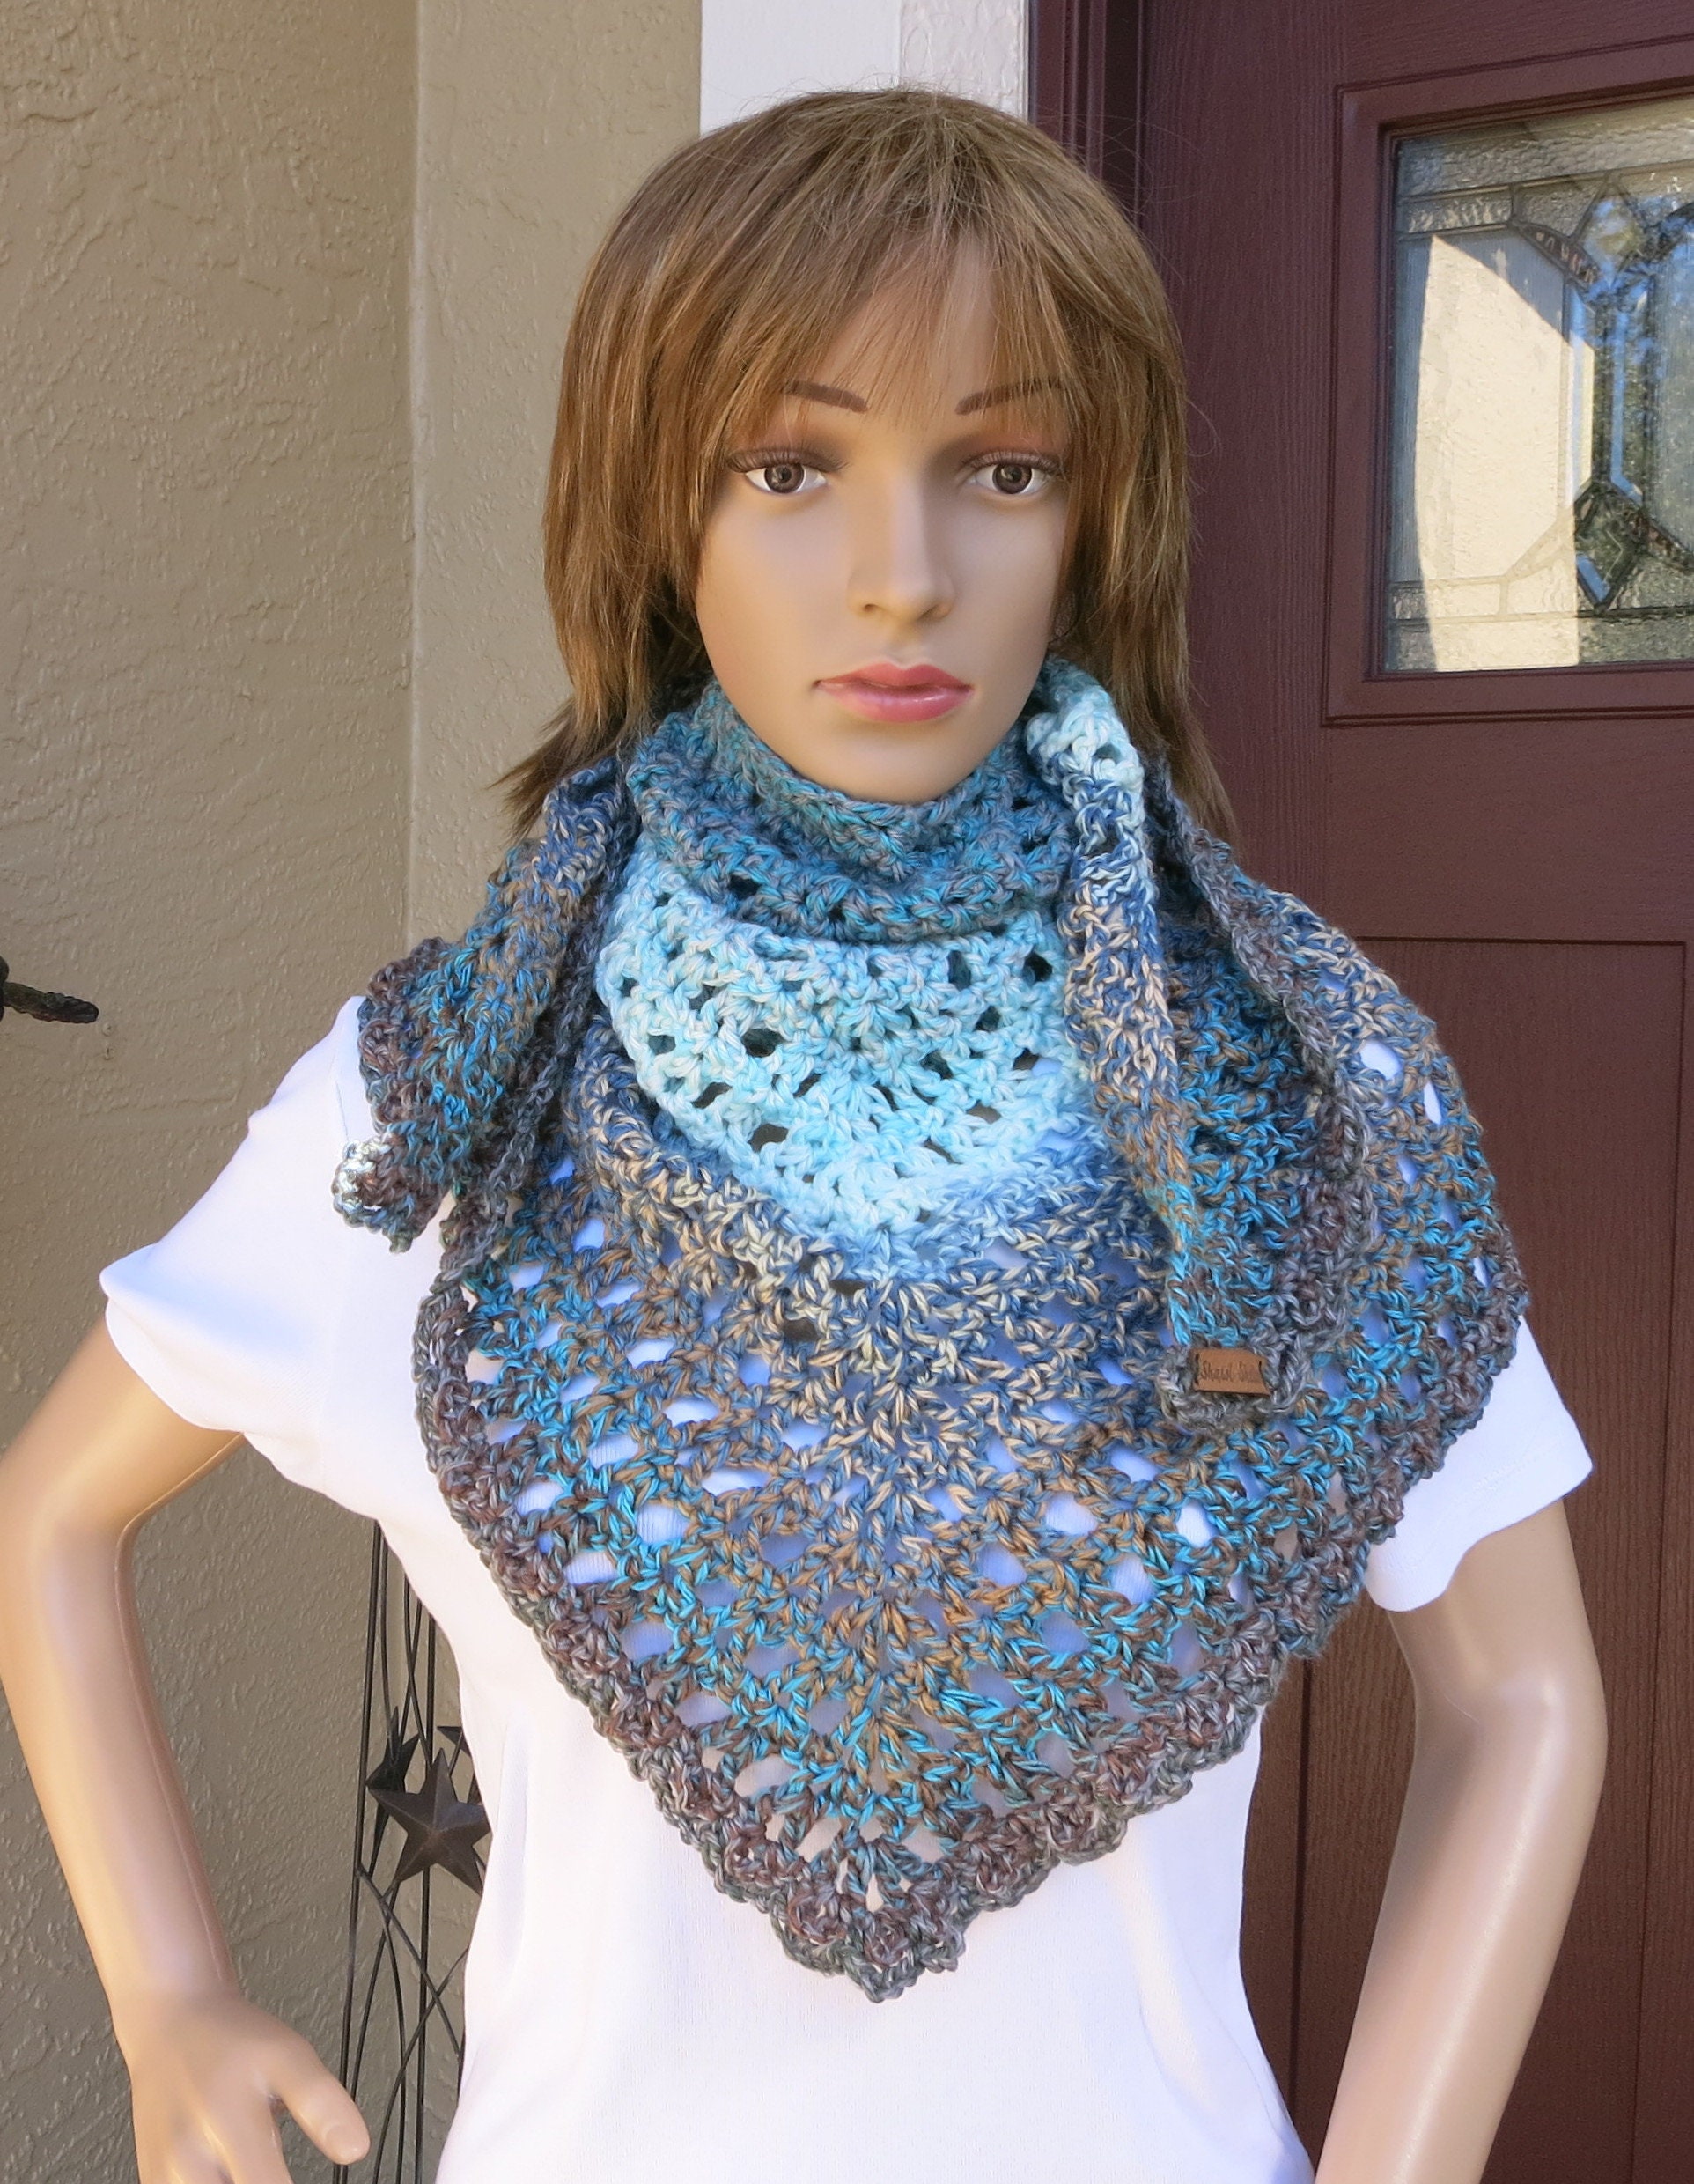 Ultrasoft Triangular Winter Scarf Handmade Crochet Fashion Accessory Gift for Her Gift for Mom Gift for Sister Urban Campus Officewear